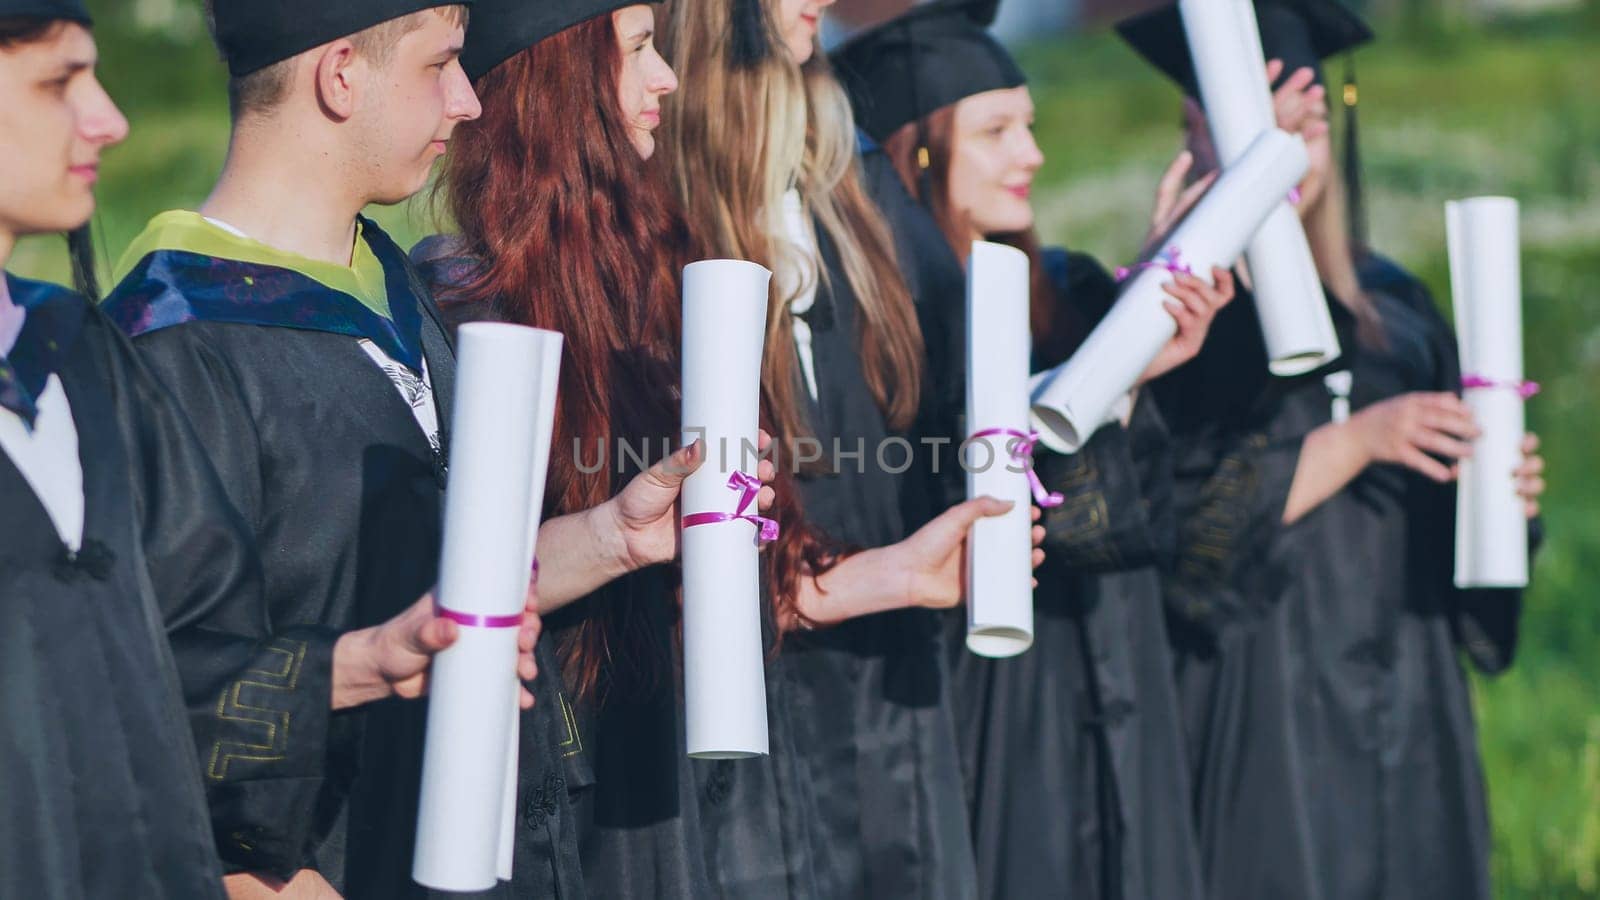 Scrolls of diplomas in the hands of a group of graduates. by DovidPro